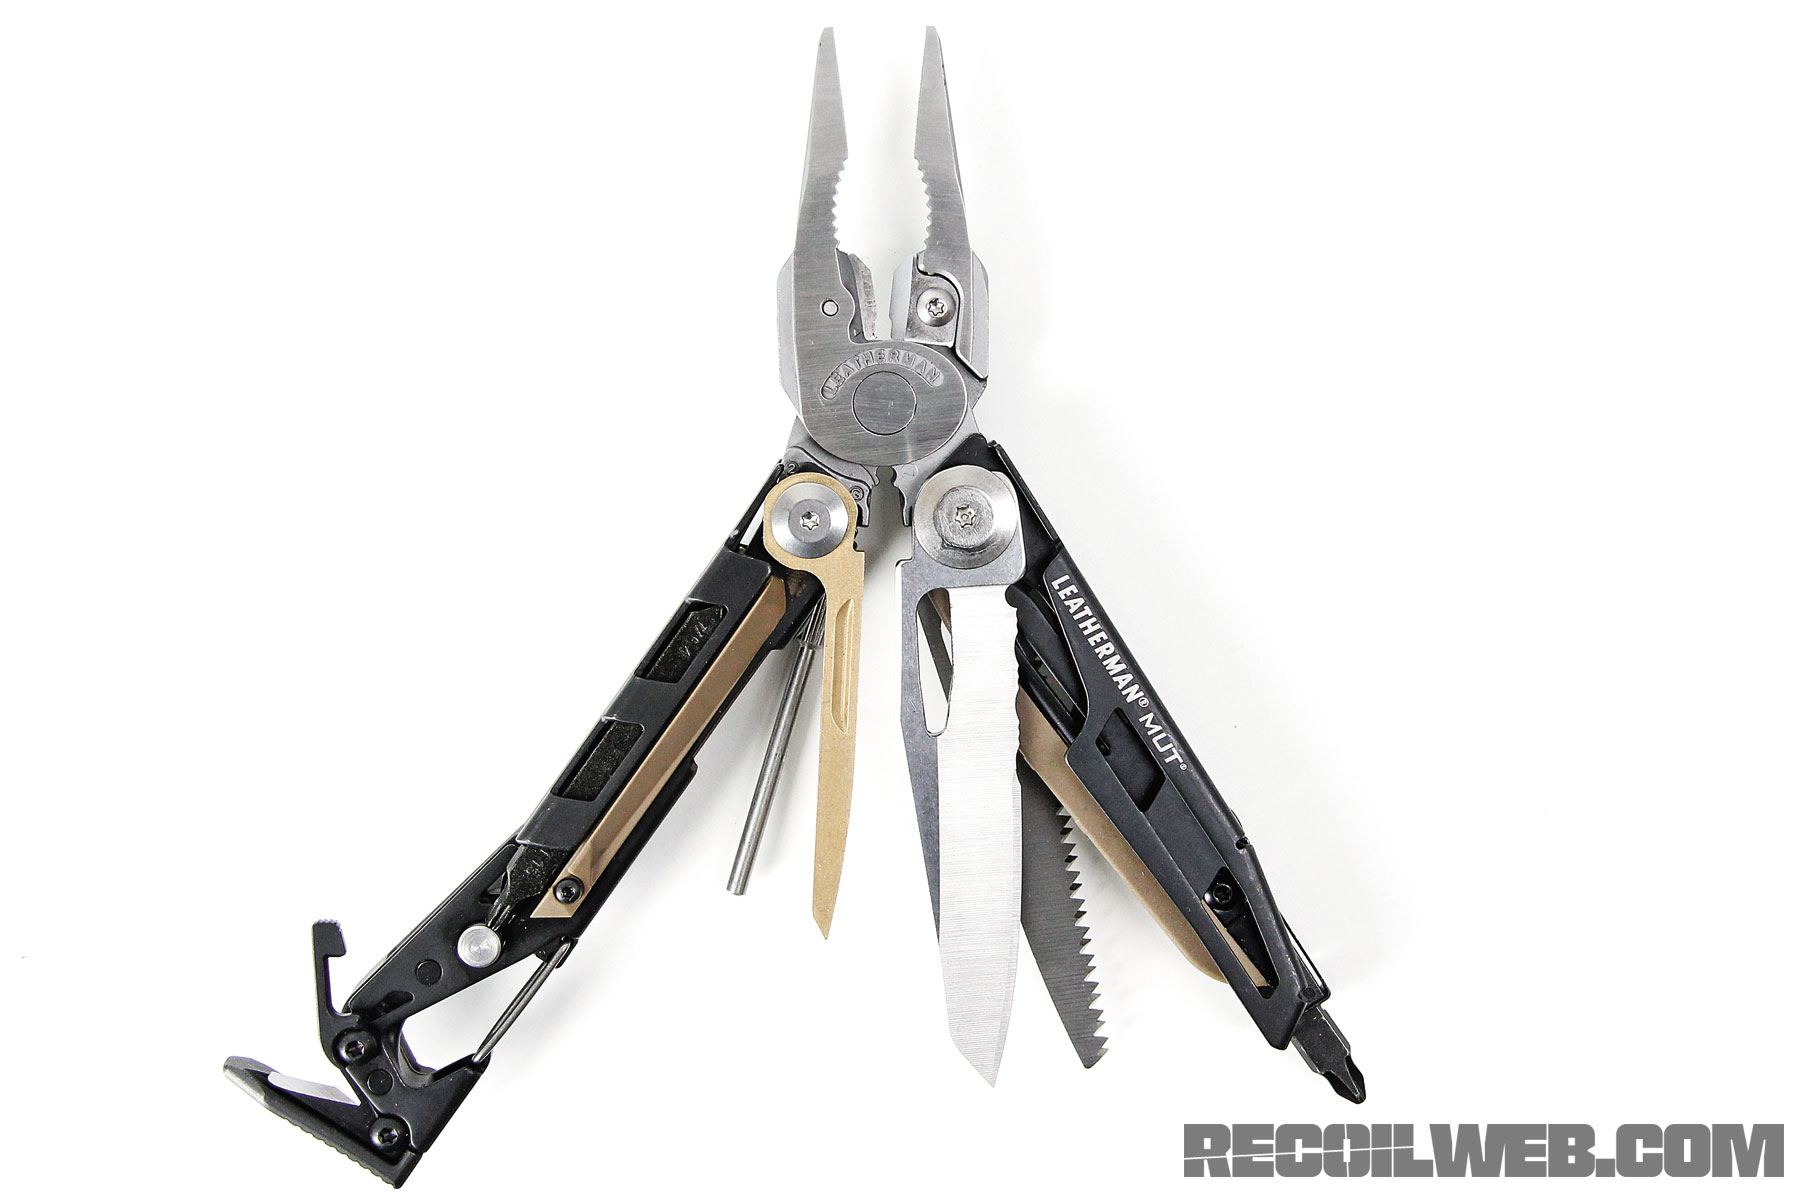 Preview – Multi-Tool Buyer’s Guide – MacGyver’s Got Nothing on These